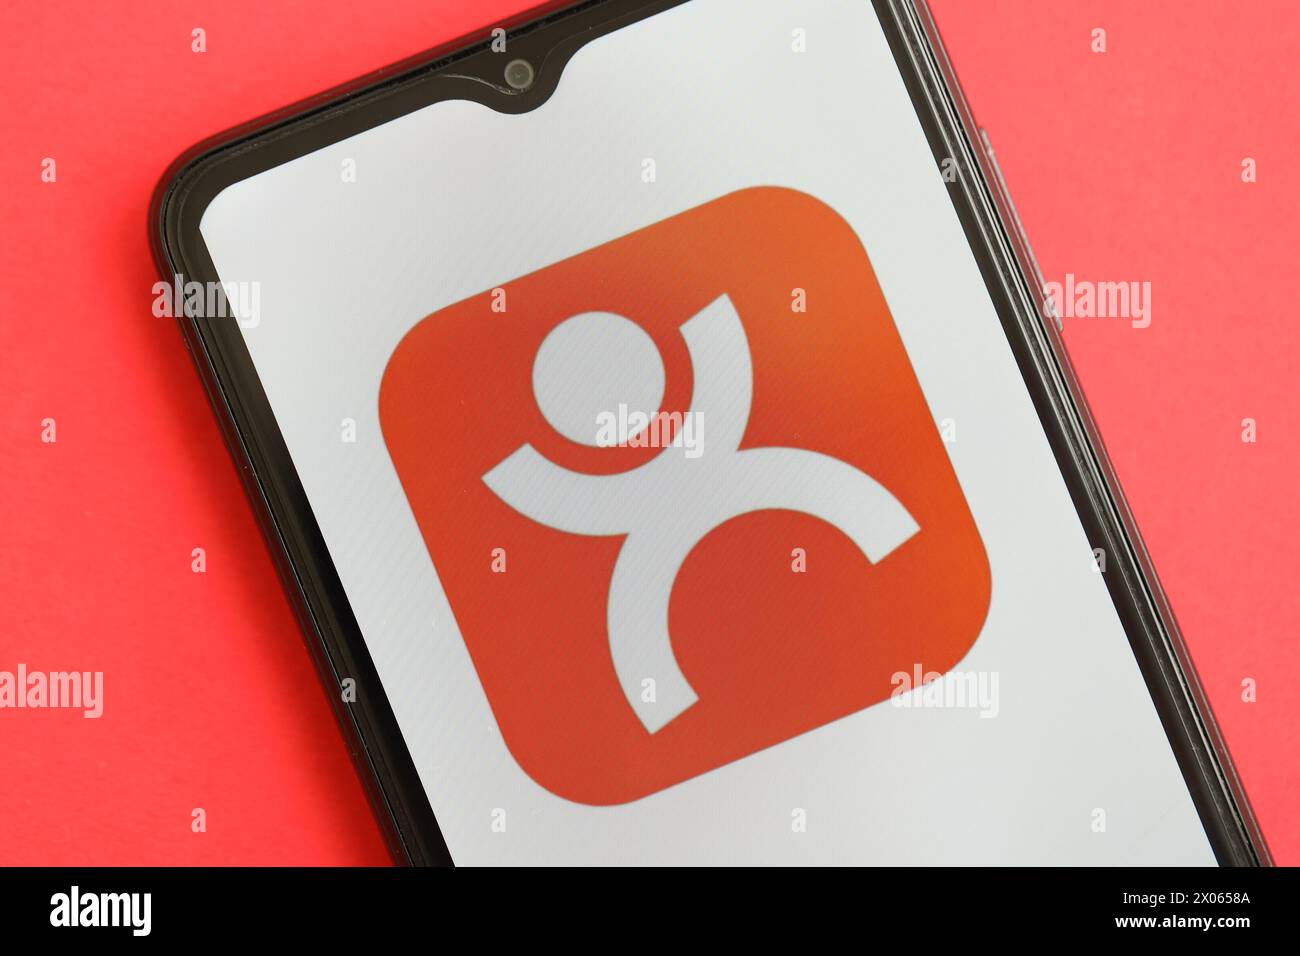 KYIV, UKRAINE - APRIL 1, 2024 Dianping platform icon on smartphone screen on red table close up. iPhone display with app logo on bright red background Stock Photo